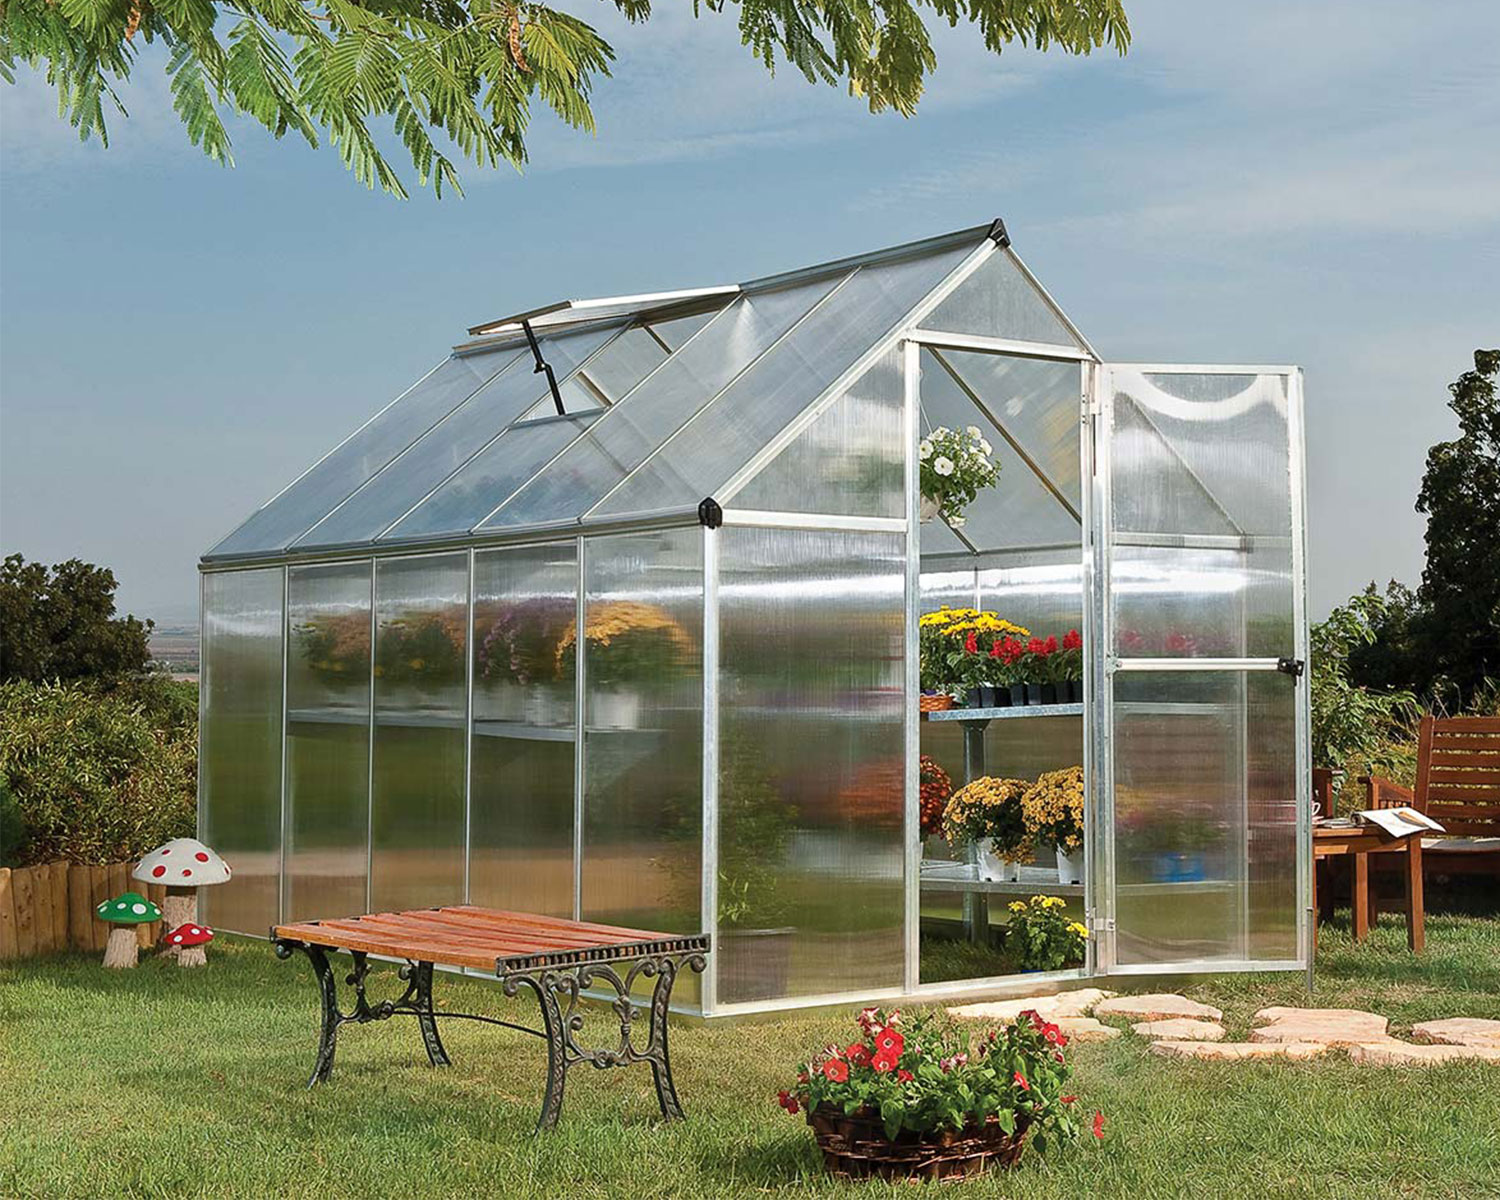 Greenhouse Mythos 6' x 10' Silver Structure & Twinwall Panels on beckyard lawn